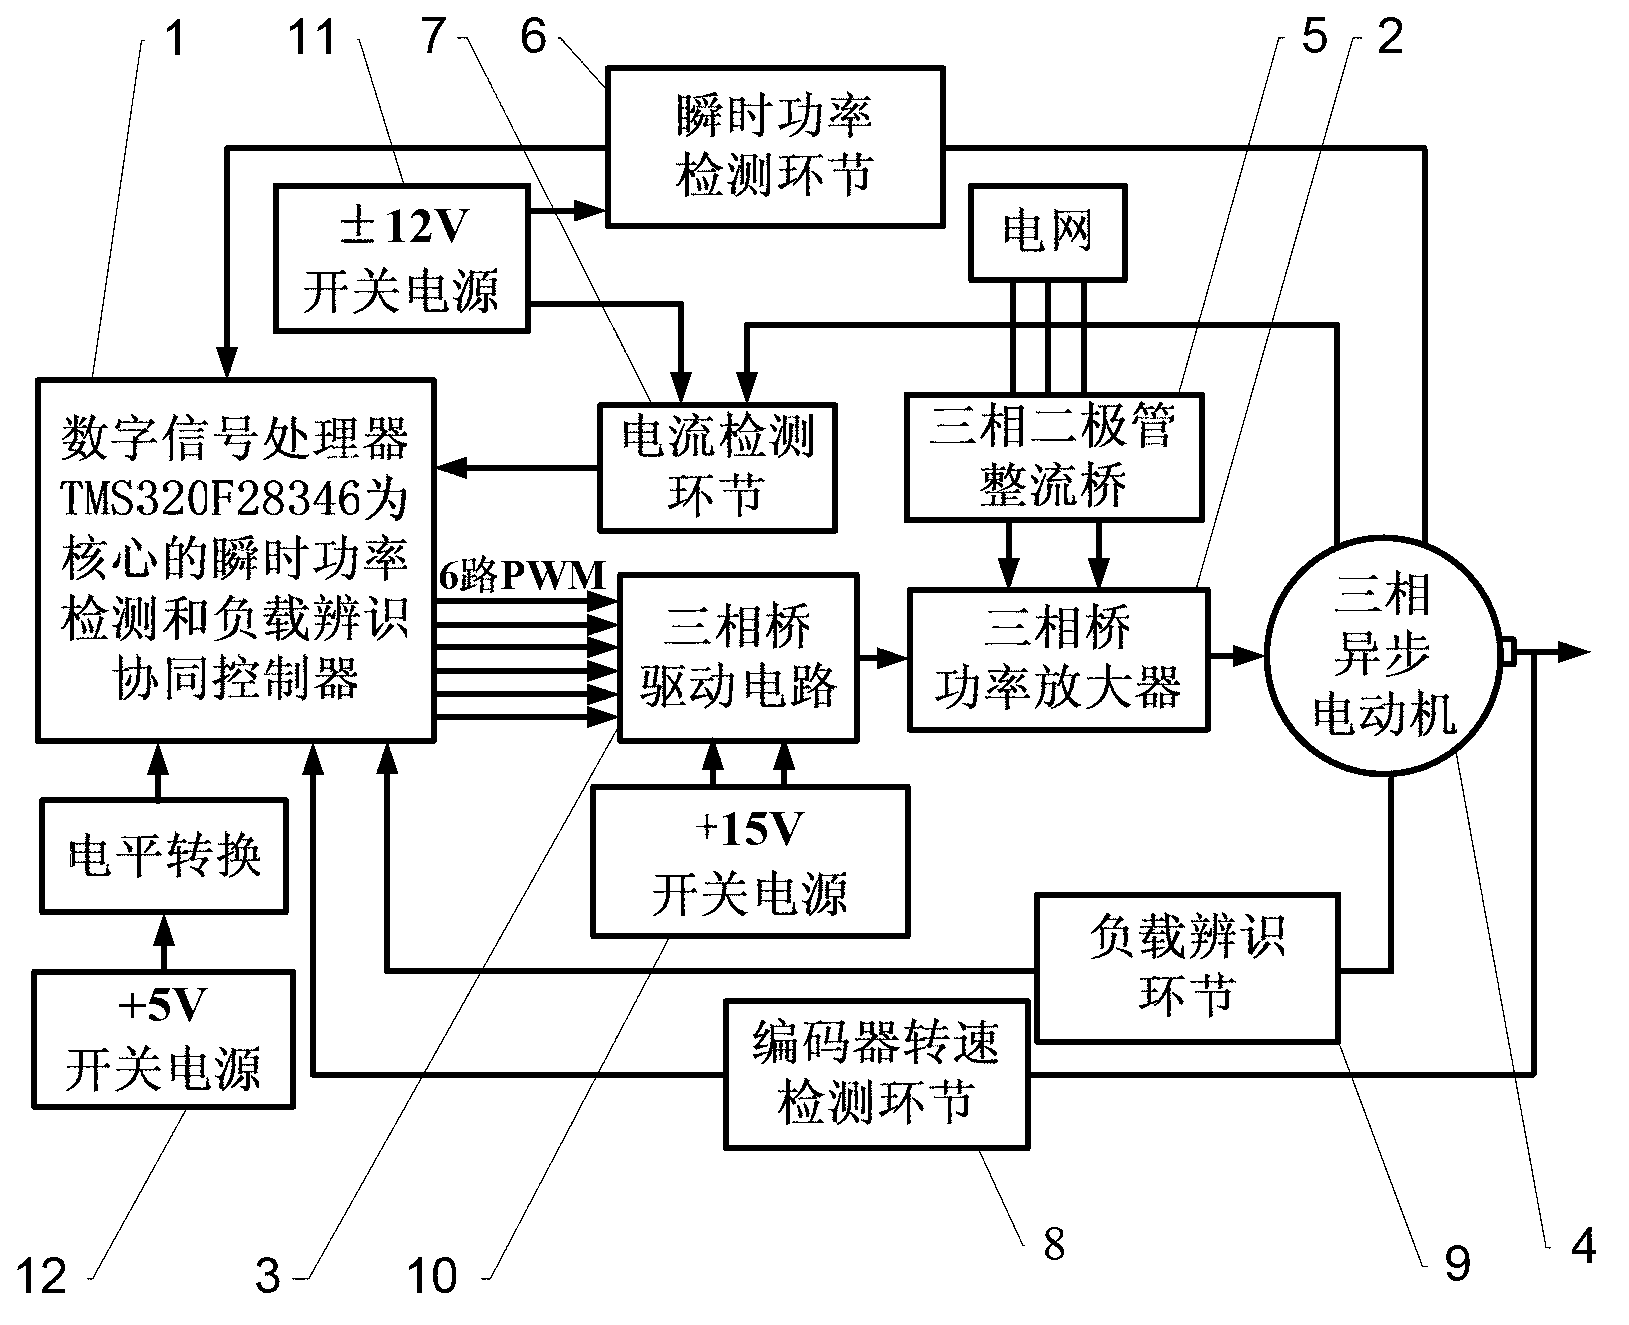 Instantaneous power detection and load identification based induction motor cooperative control system